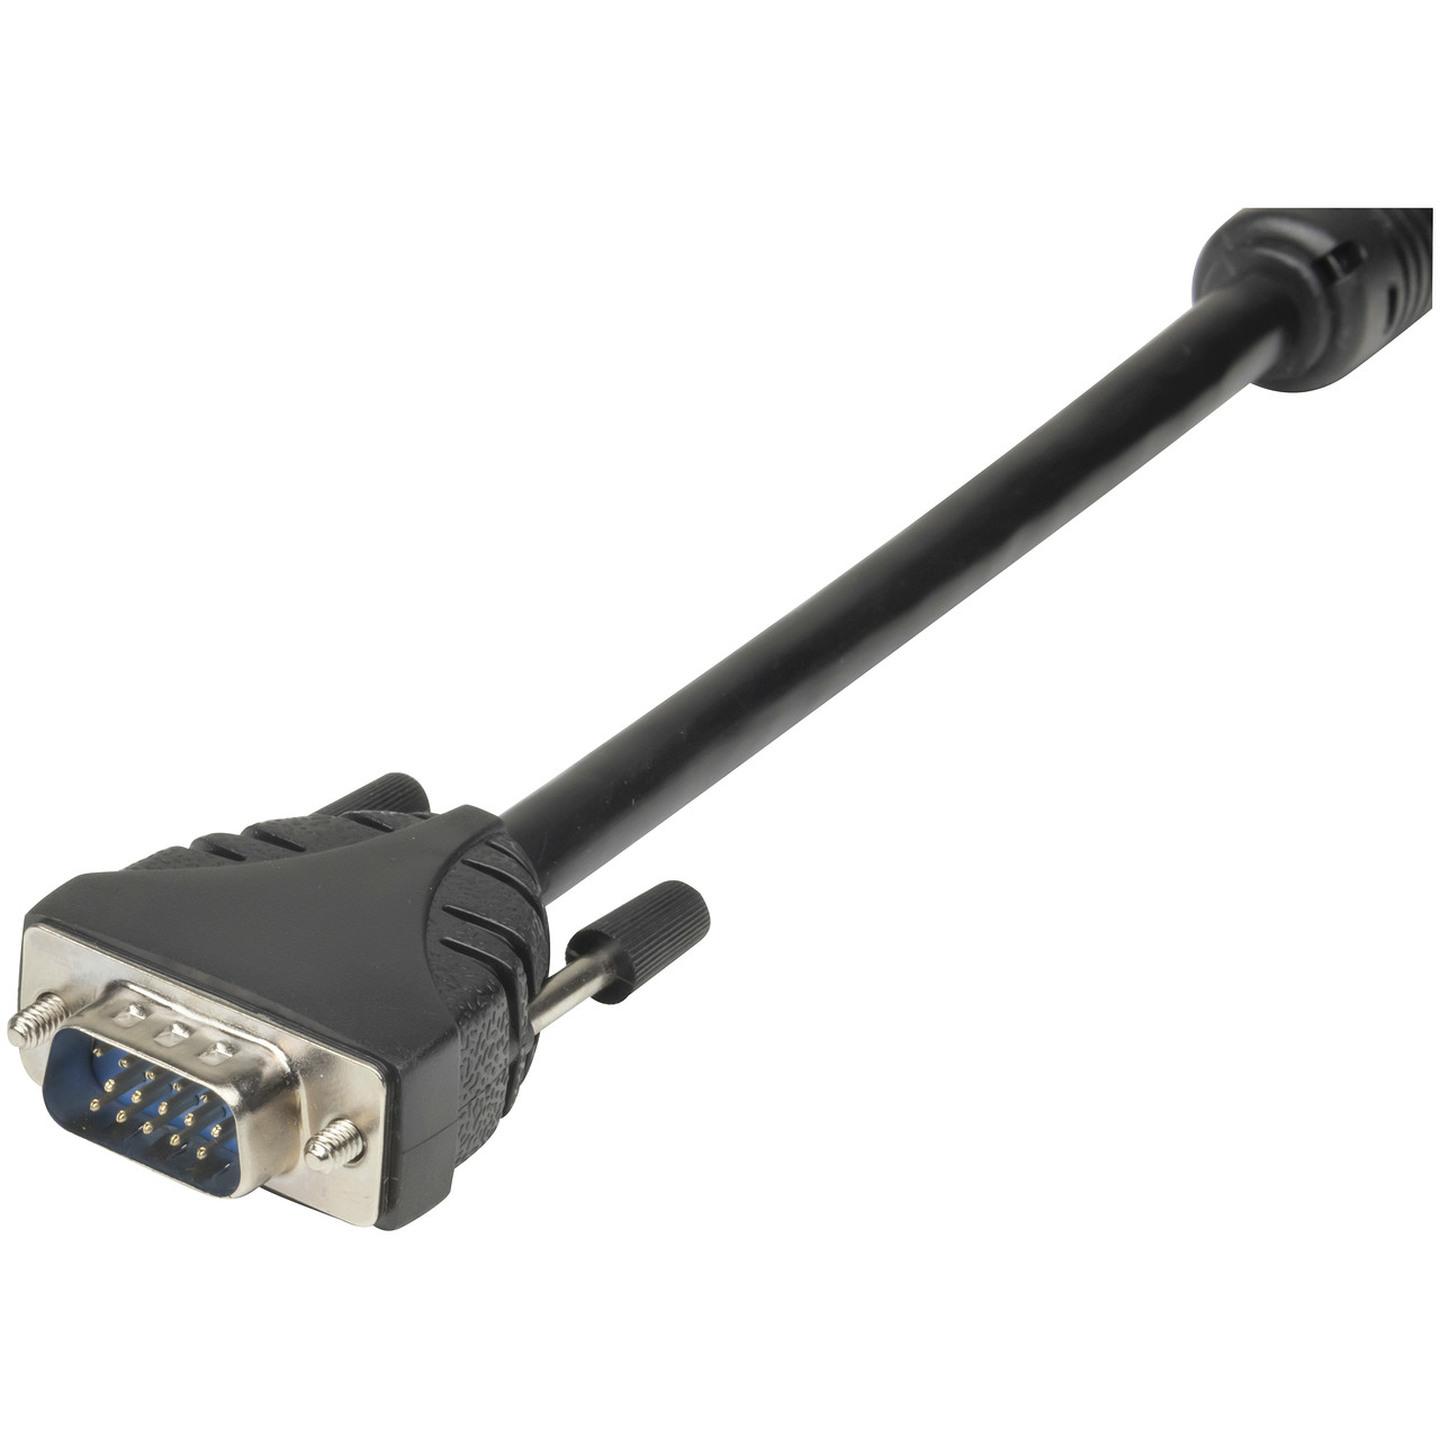 DVI-A to VGA Video Cable 2m